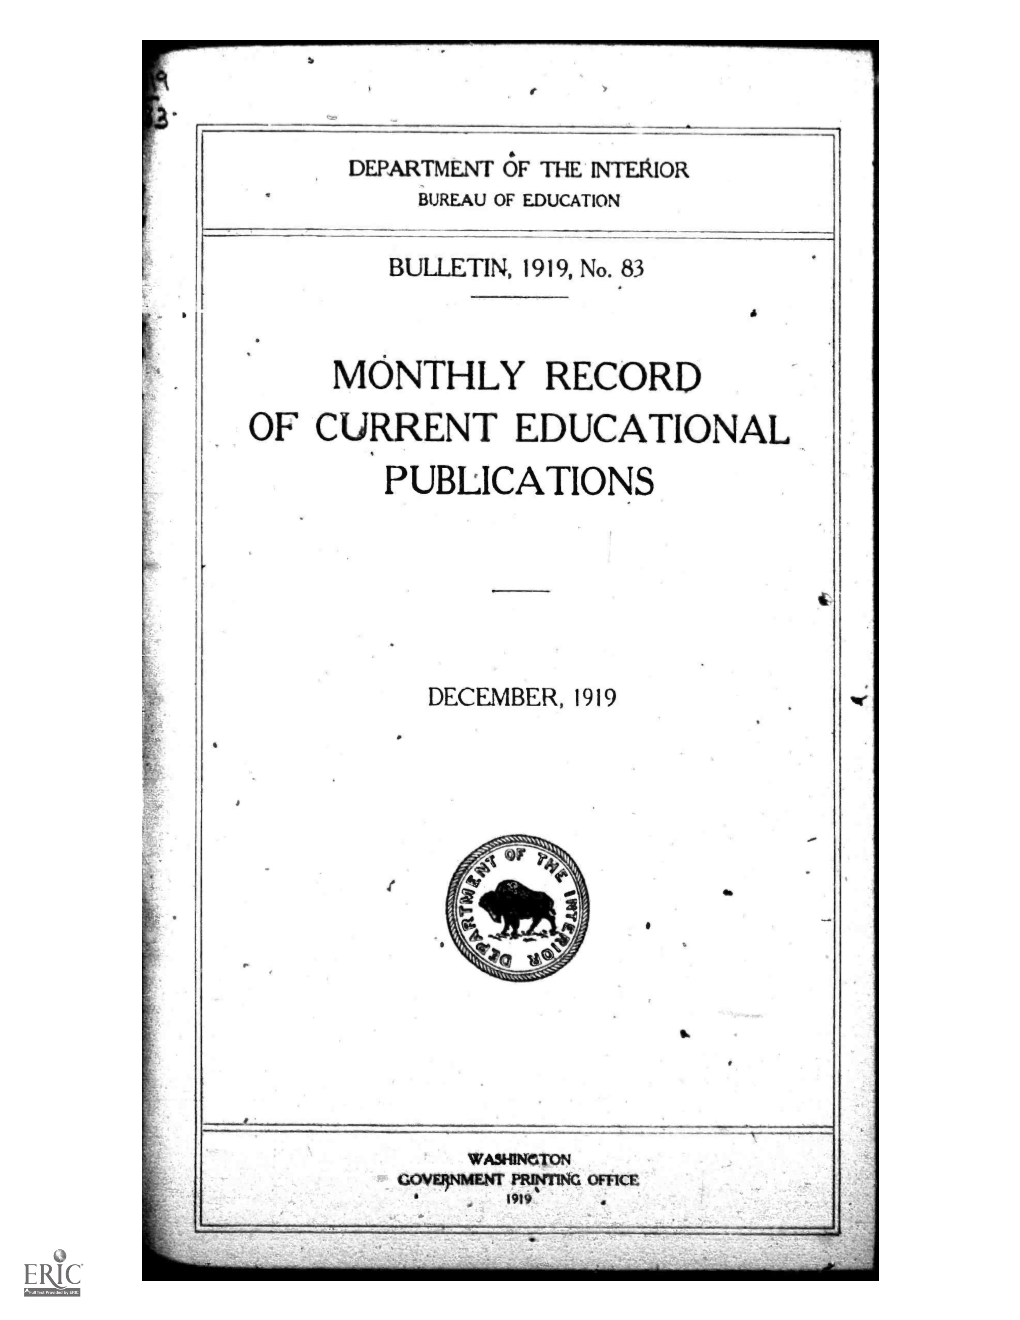 Monthly Record of Current Educational Publications